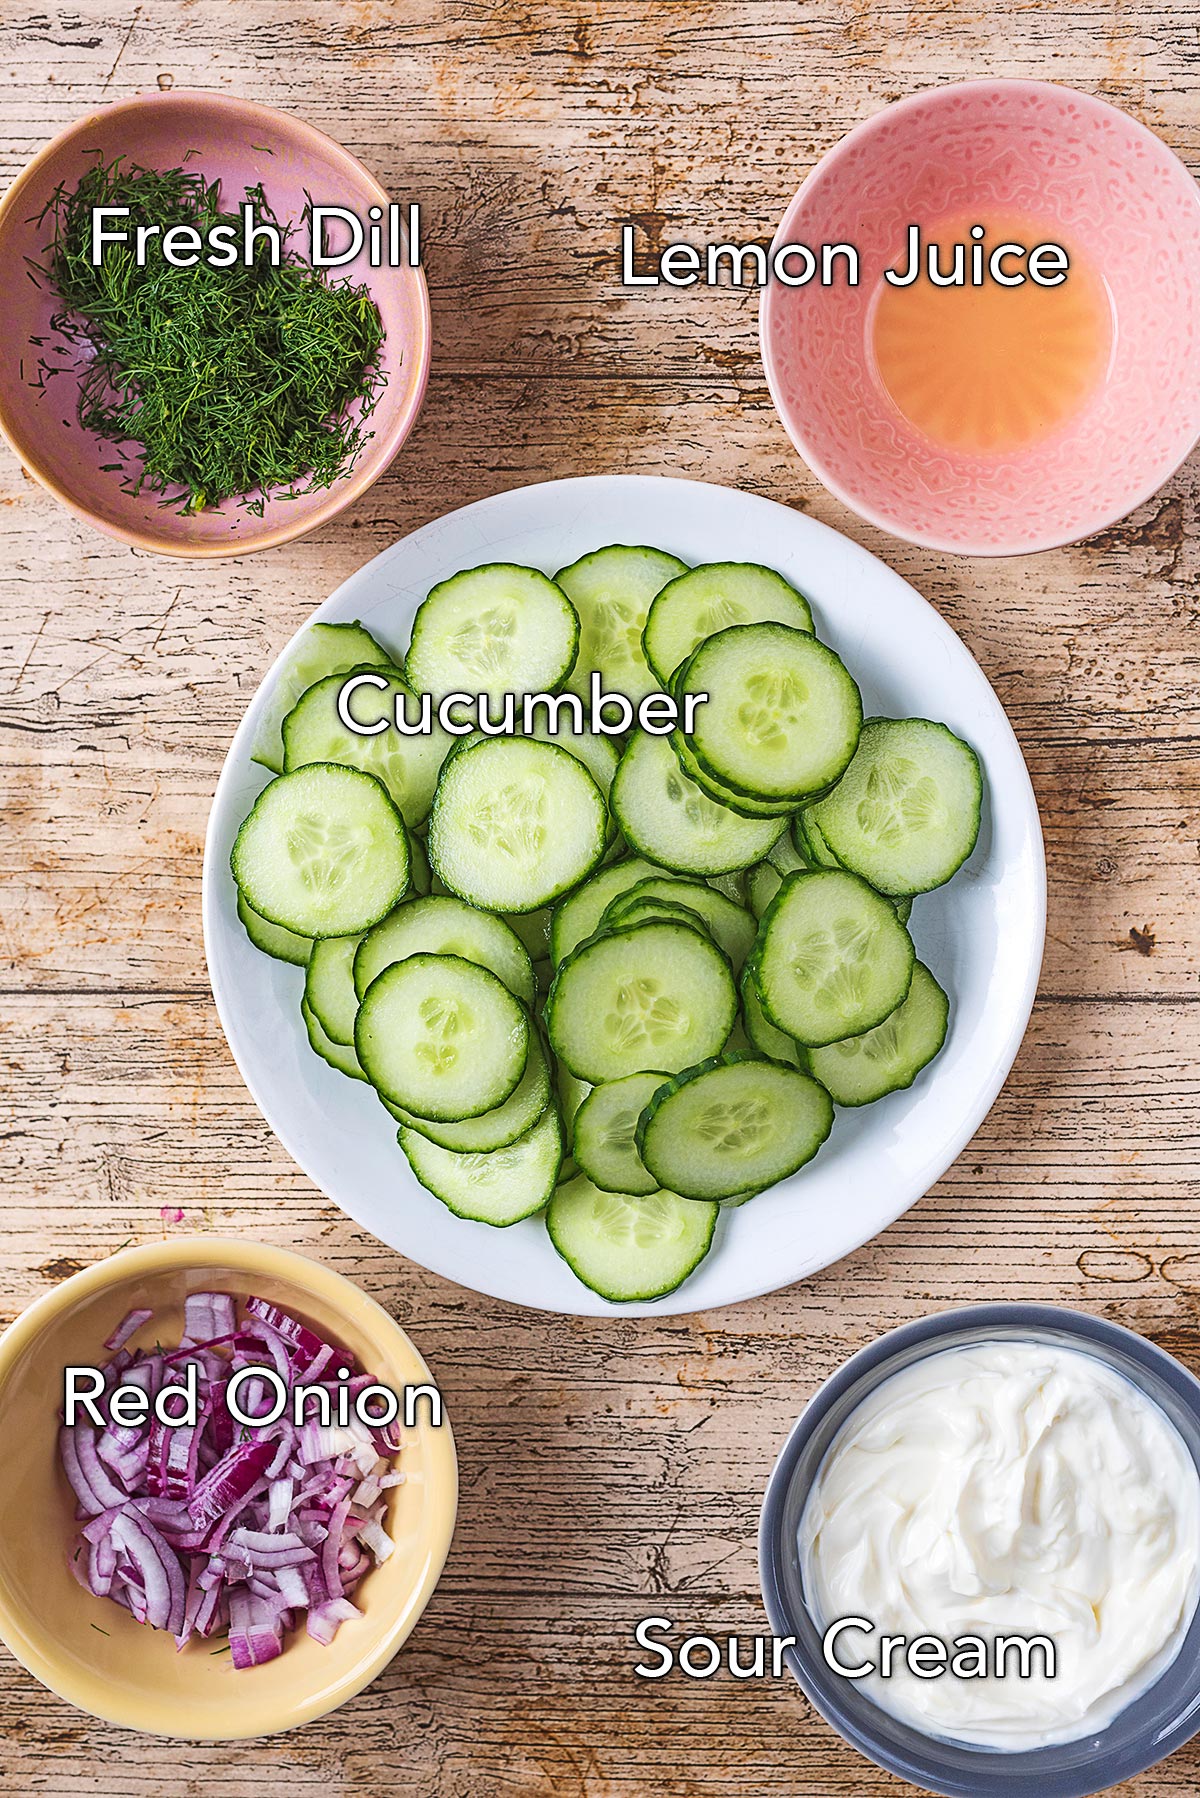 A bowl of sliced cucumber surrounded by bowls of dill, lemon juice, chopped onion and sour cream